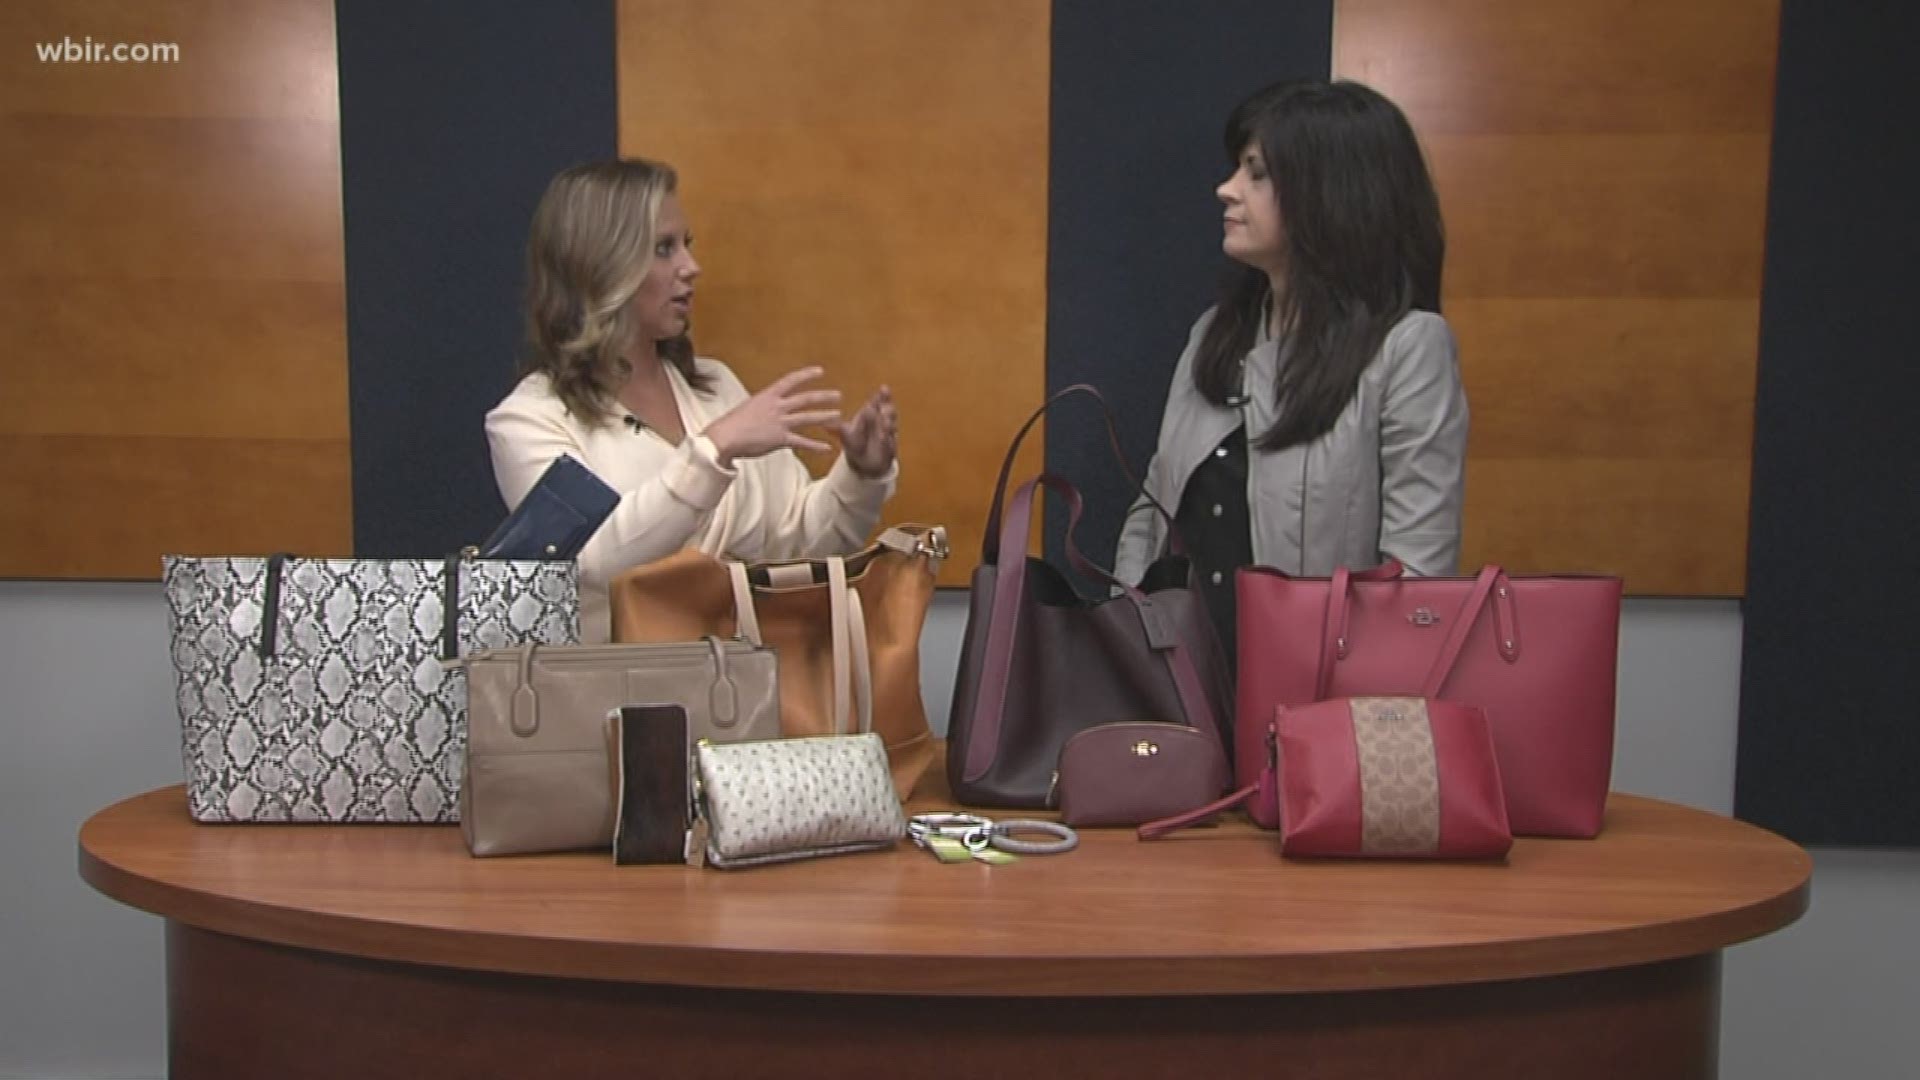 Whether it's a purse or a diaper bag, keeping it neat can be a challenge. Elizabeth Ogle, a beauty blogger, shares how to keep your bag organized.